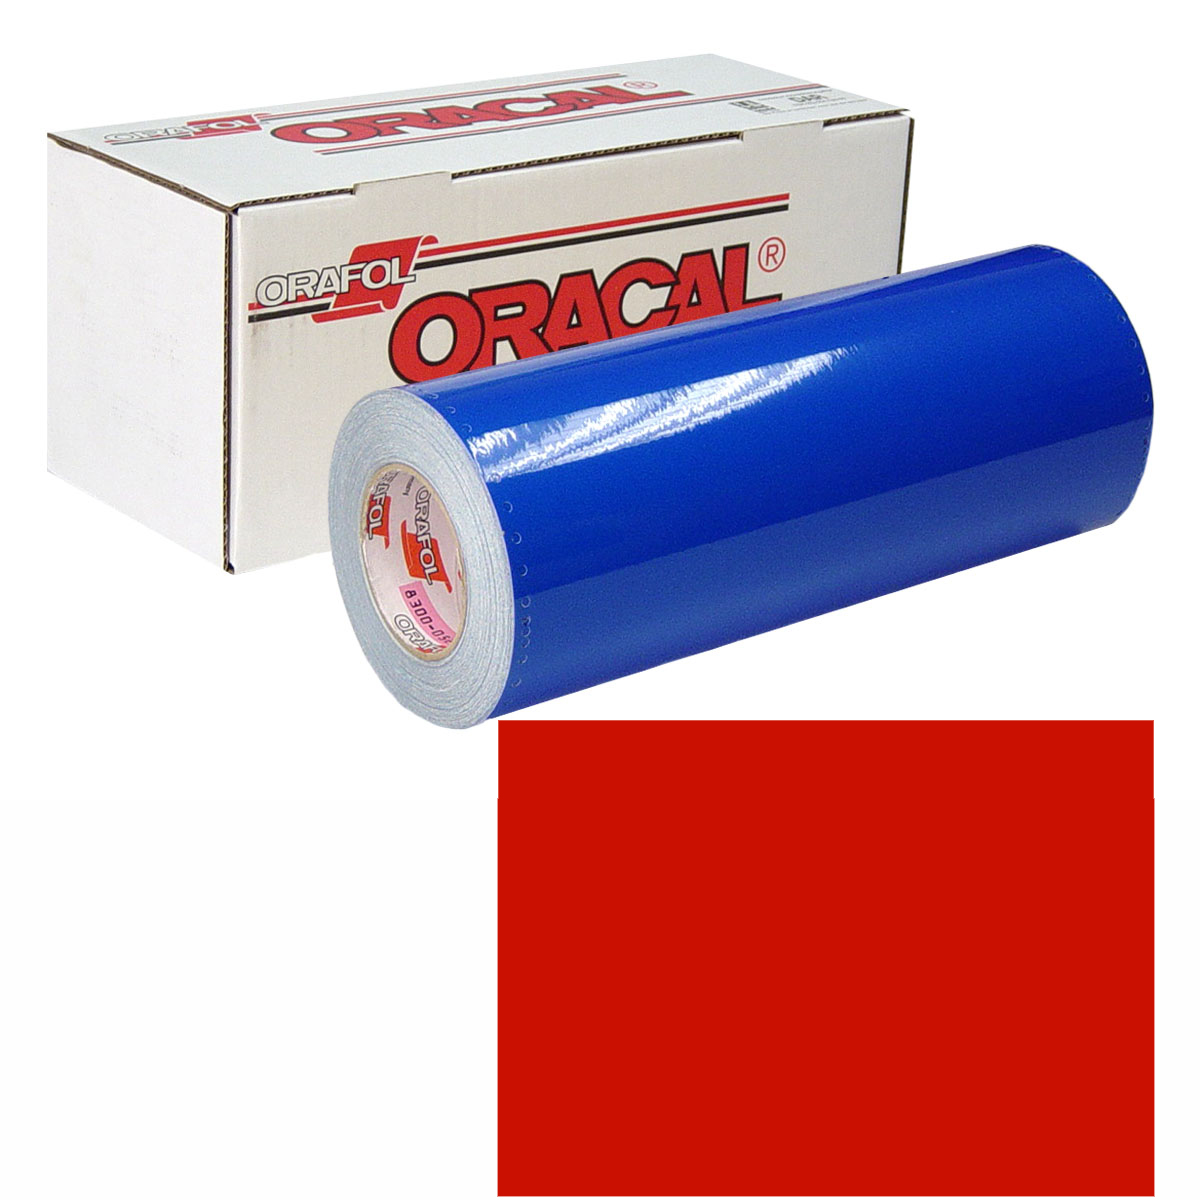 ORACAL 631 15in X 10yd 032 Light Red